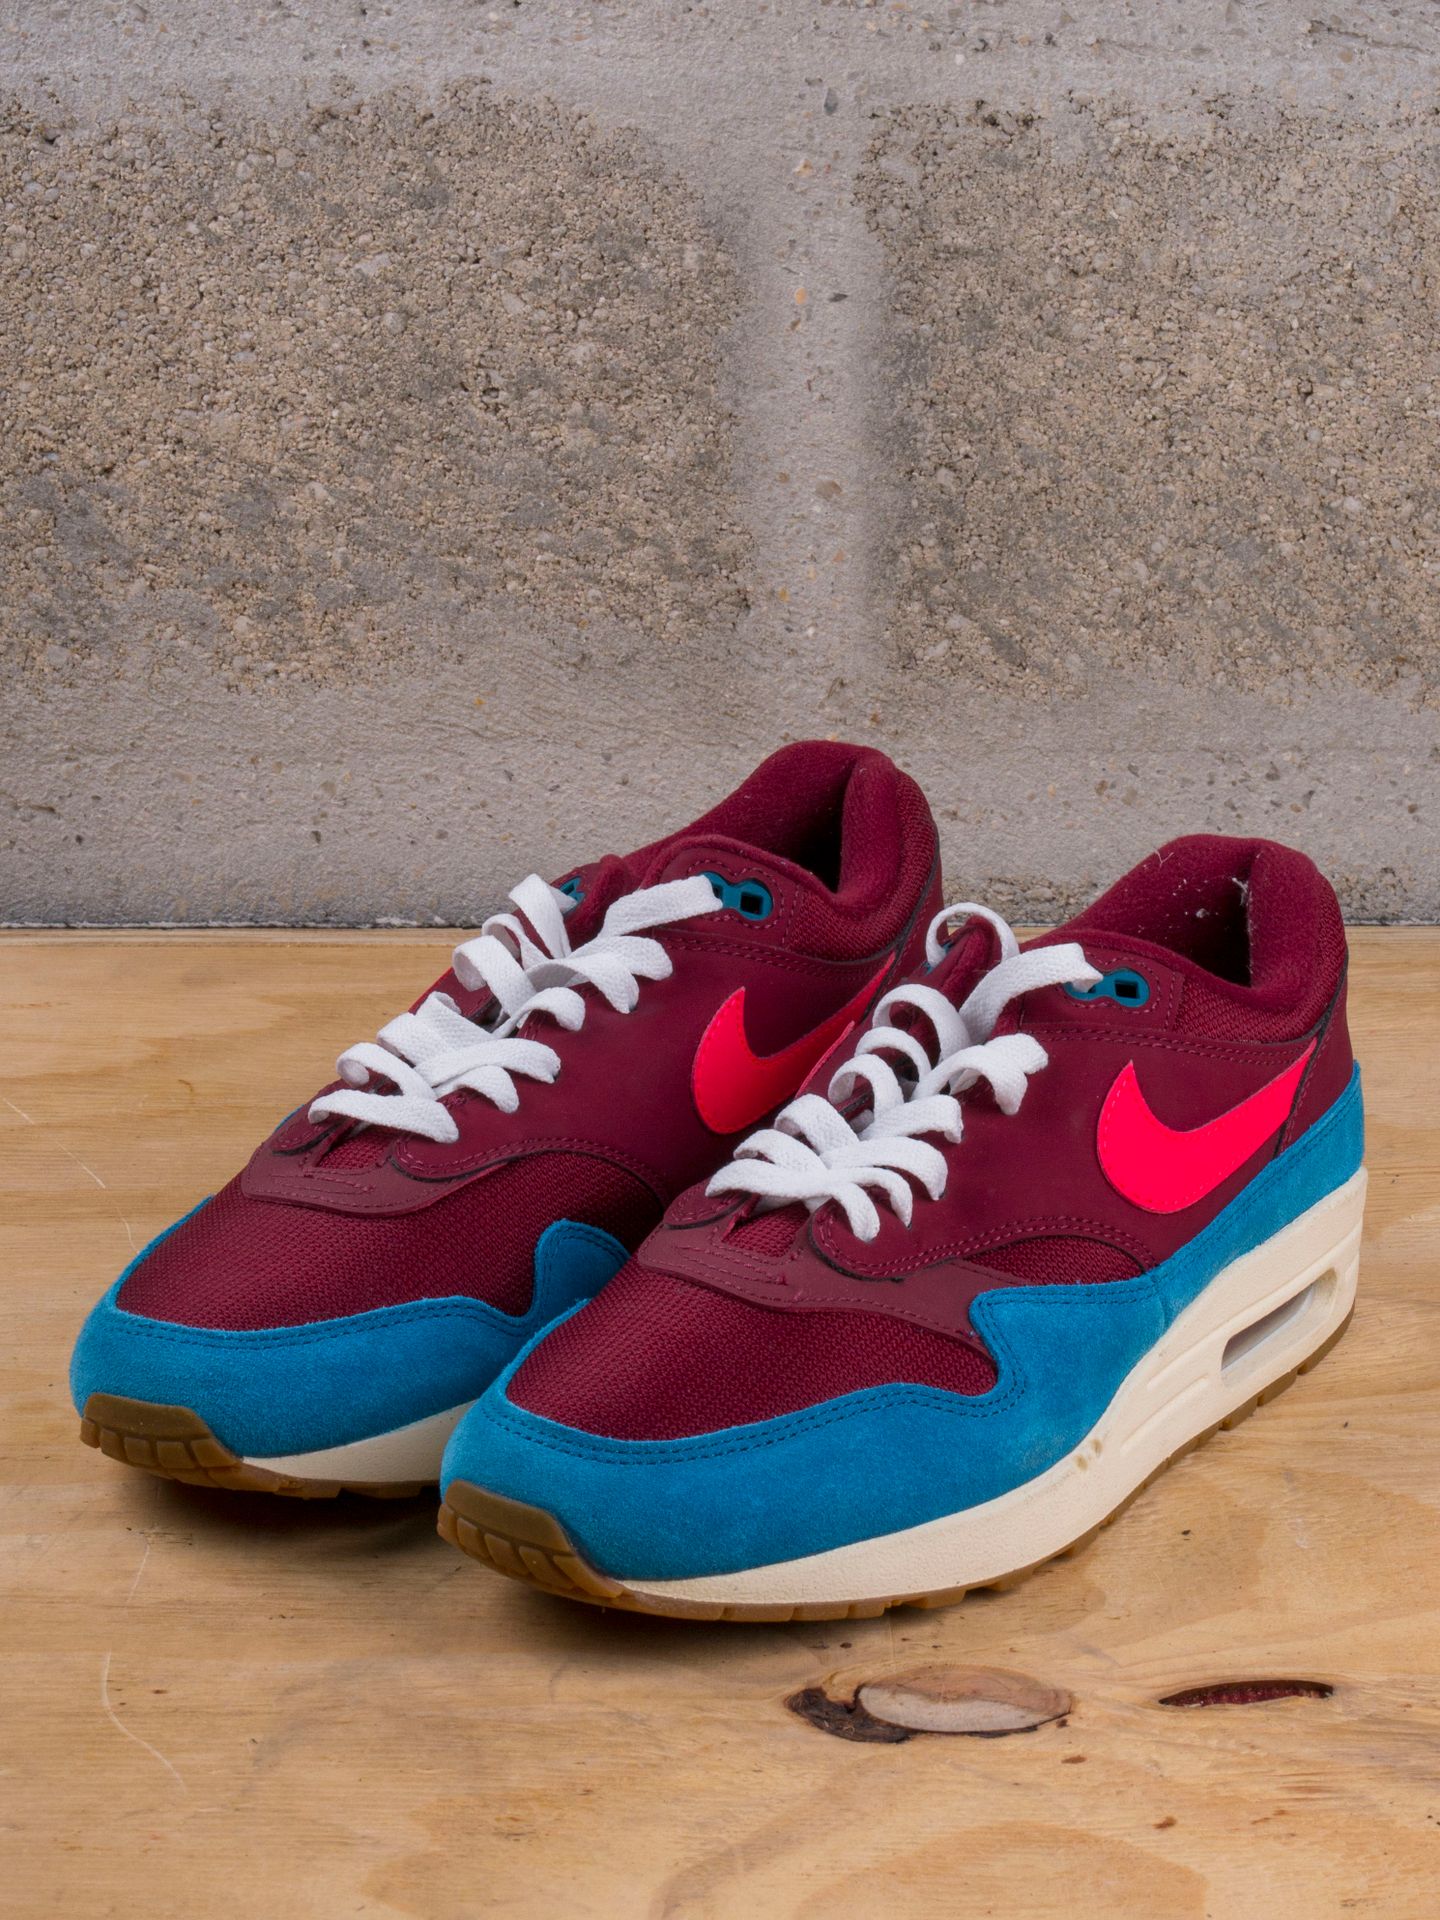 Null NIKE AIR MAX 1

Equipo Red Green Abyss 

(AH8045-601)

US 7,5 / EU 40,5

(M&hellip;